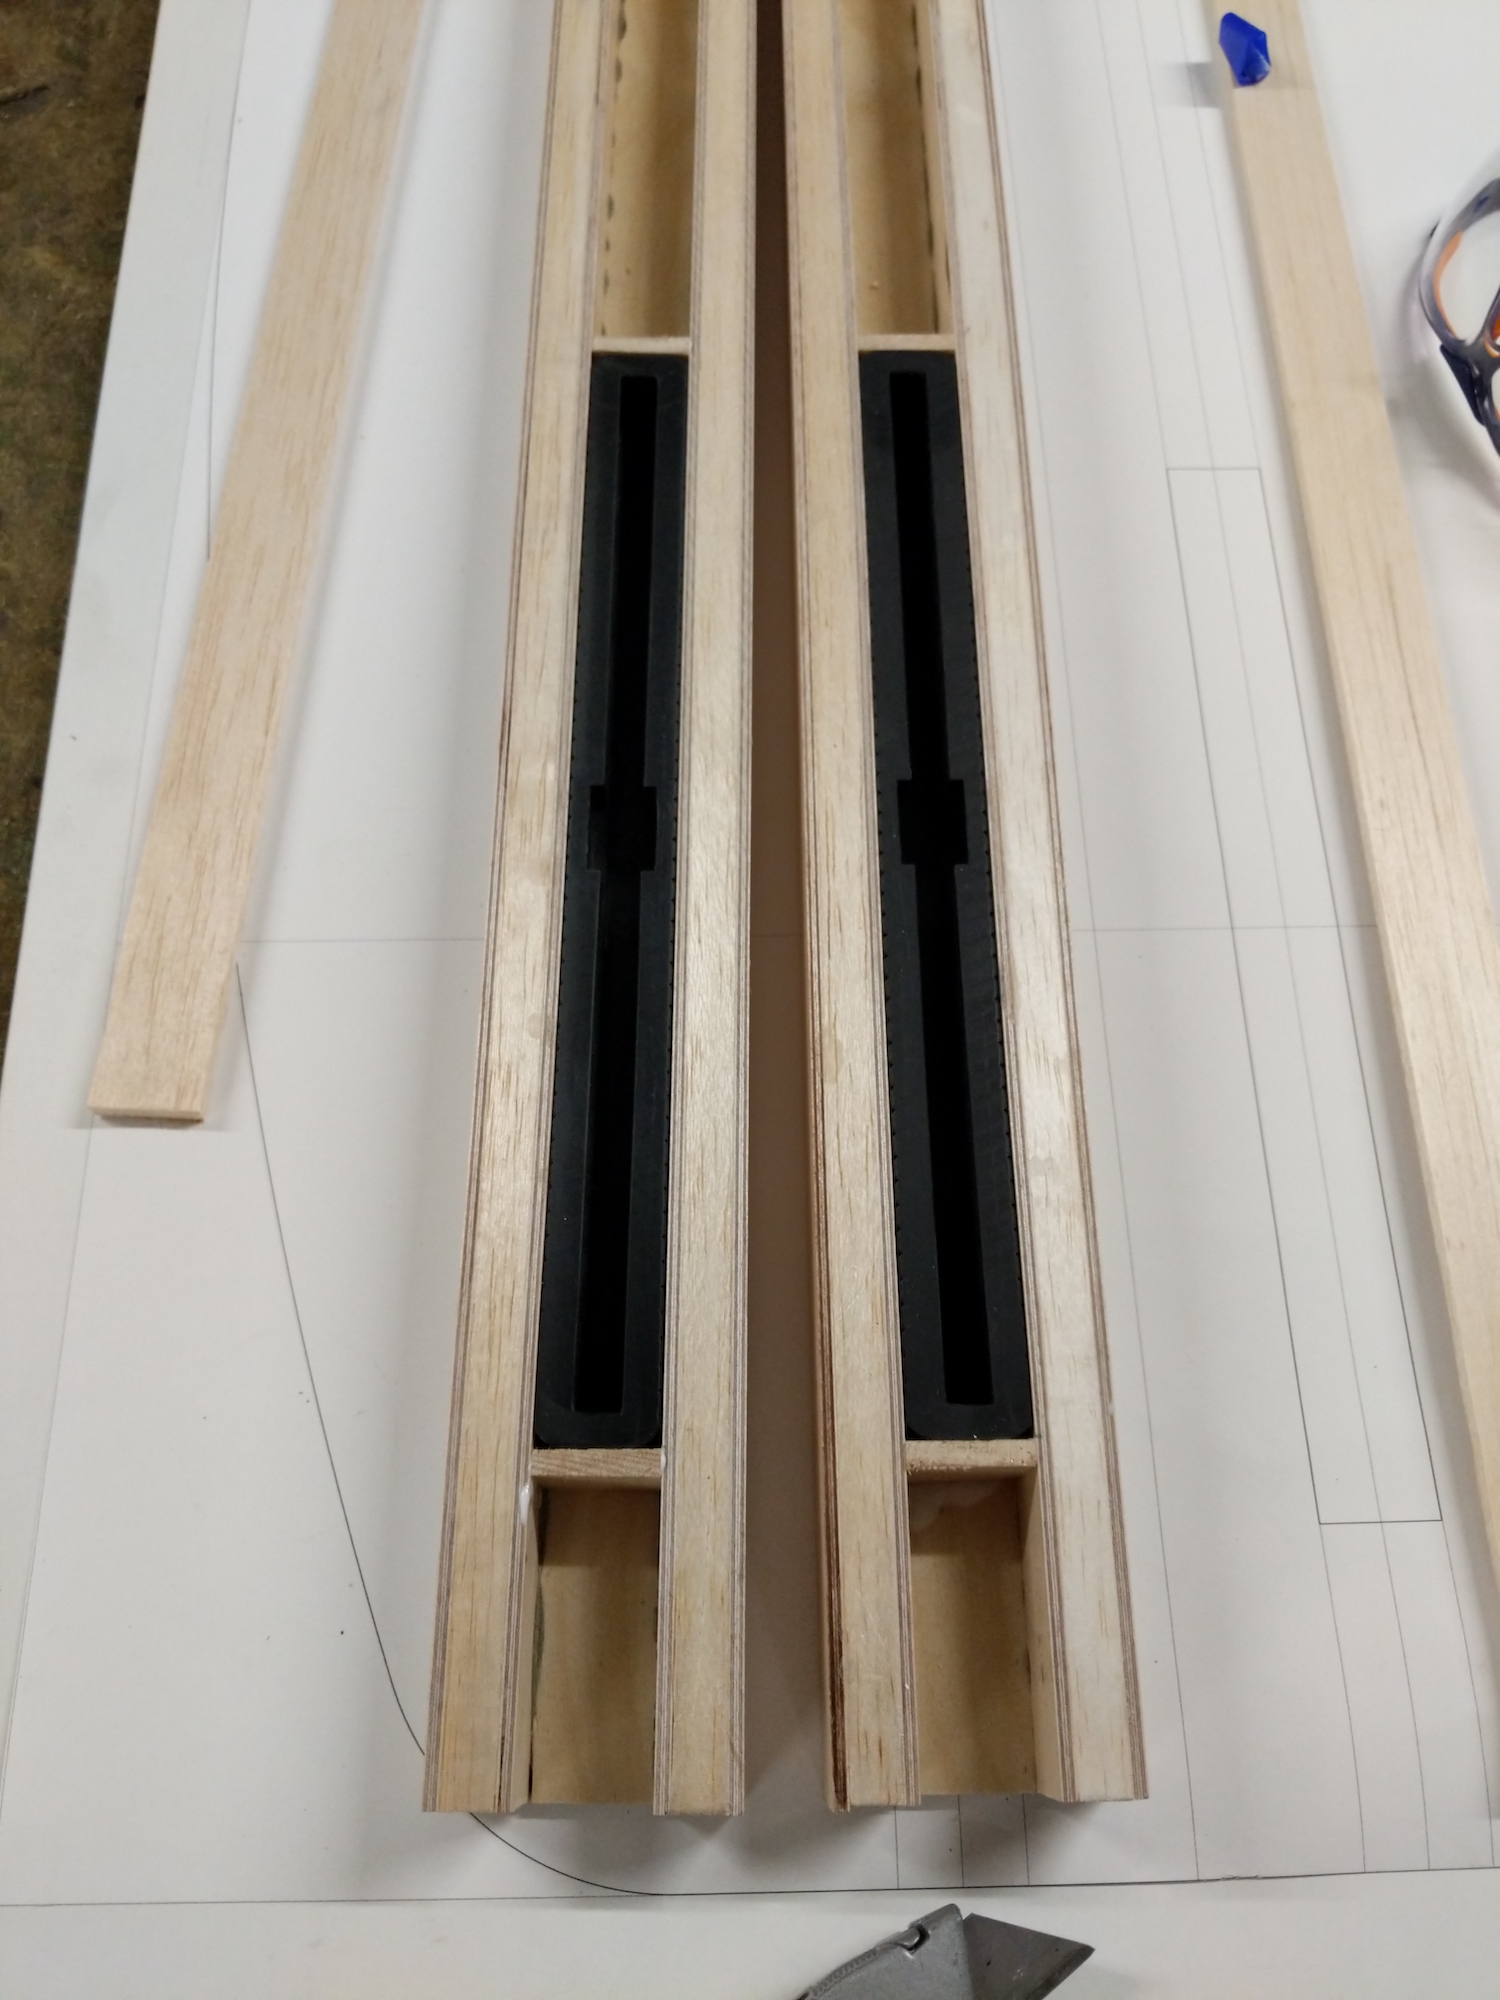 Gluing foil boxes into the stringers